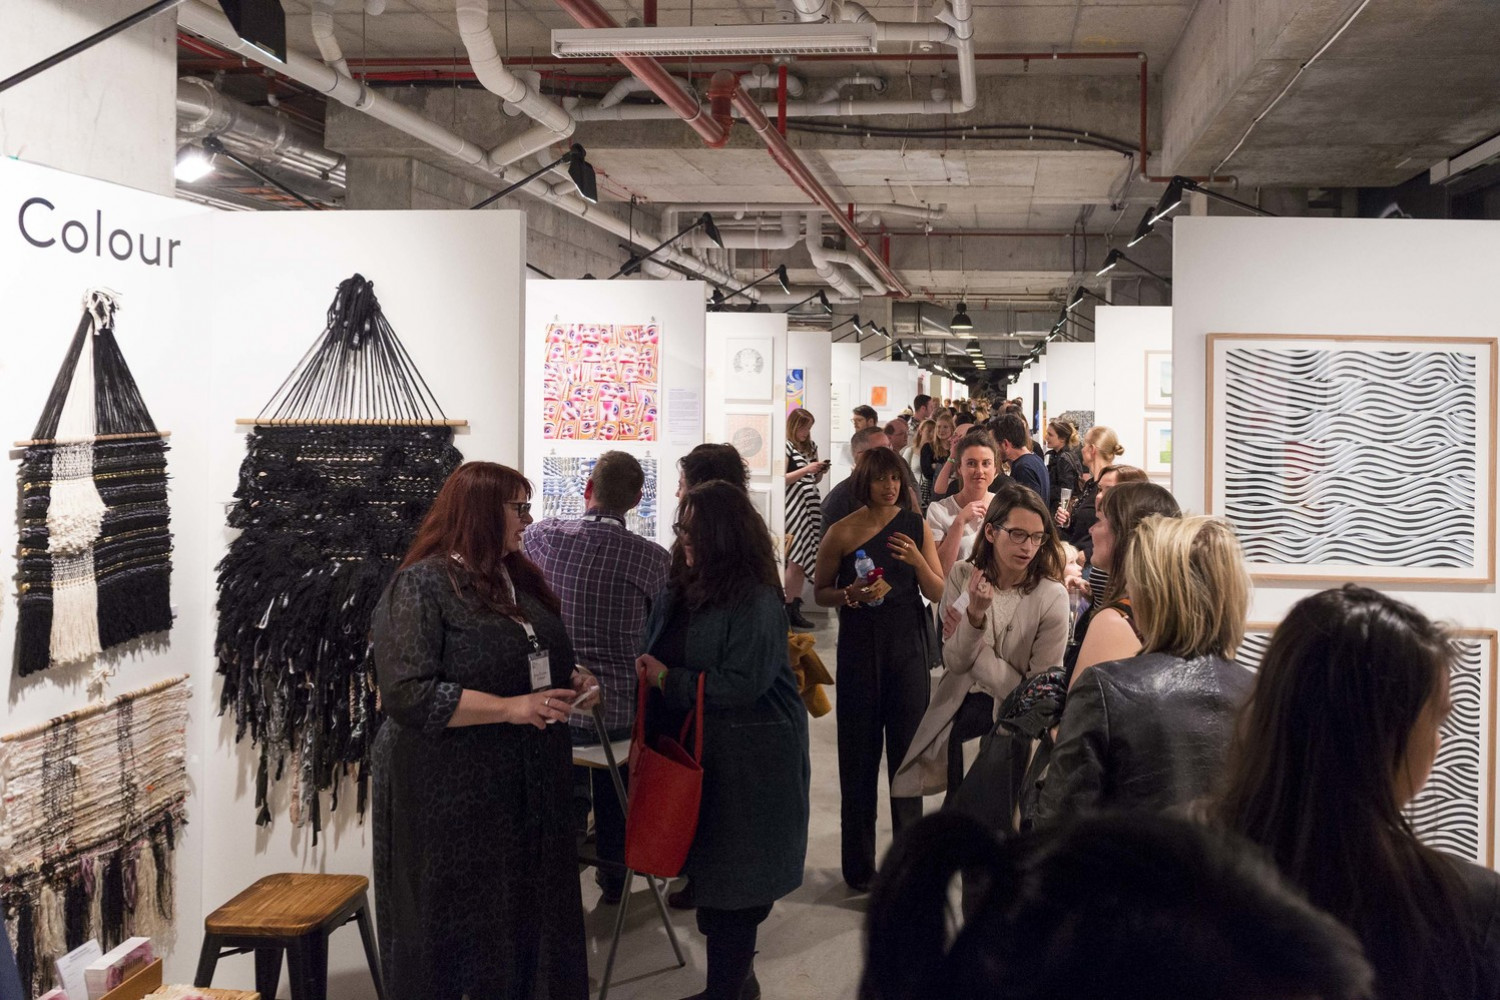 Directing The Other Art Fair in 2015 was a great experience for me - I learnt so much and really built my network with local artists. I also launched my own companies: Art Pharmacy, Art Pharmacy Consulting and Culture Scouts during this event